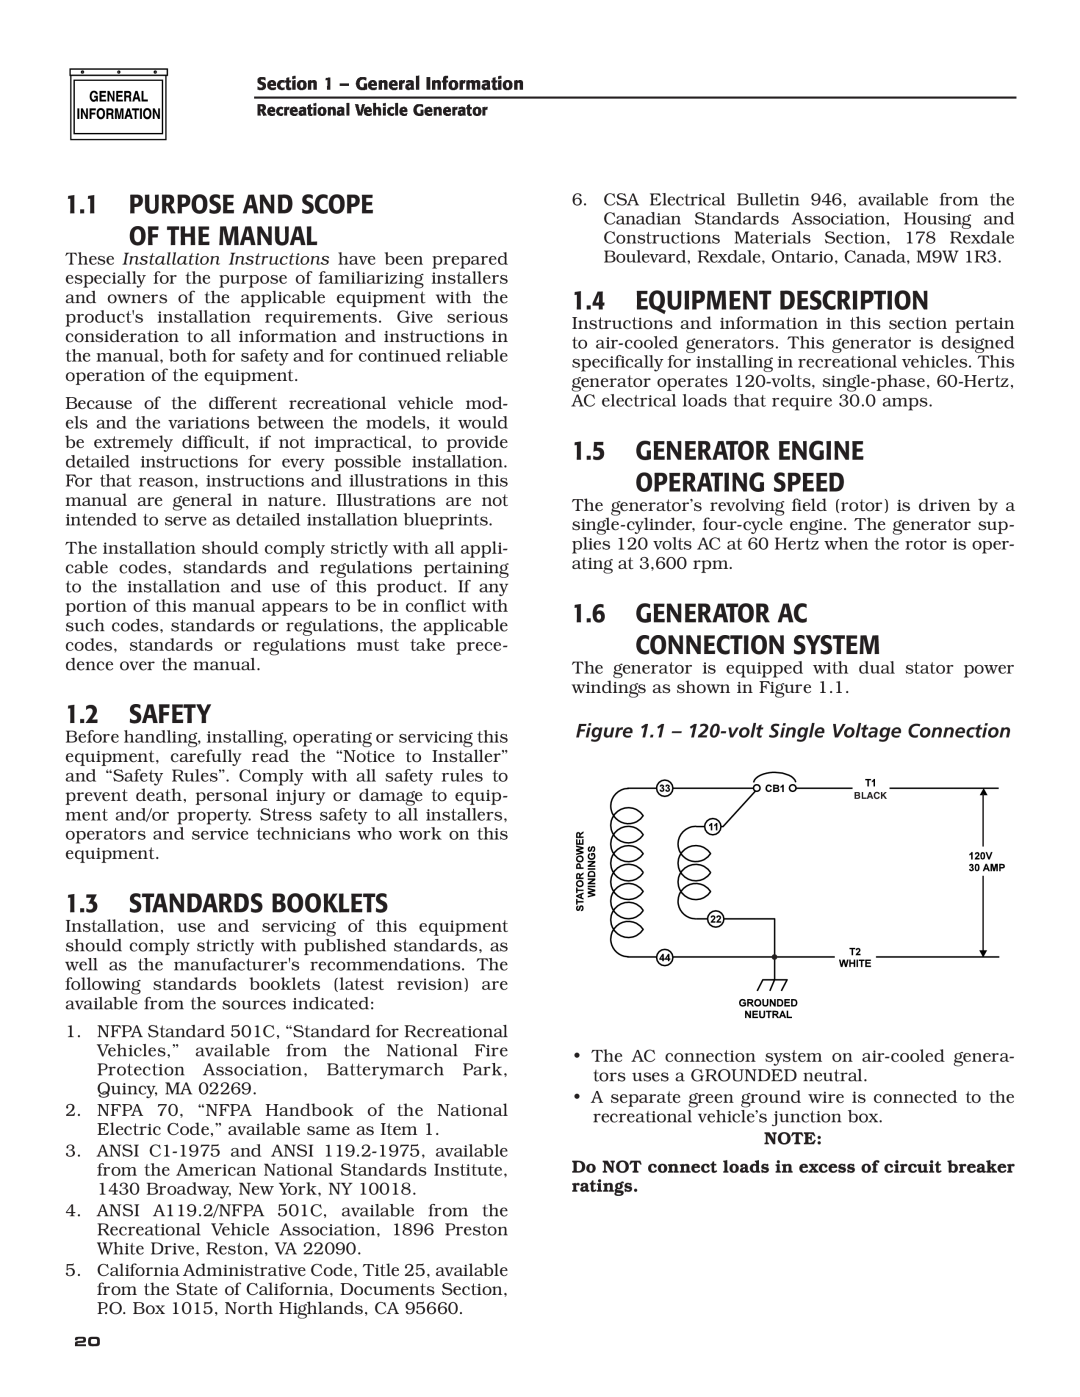 Guardian Technologies 004708-0 Purpose And Scope Of The Manual, Equipment Description, Safety, Standards Booklets 